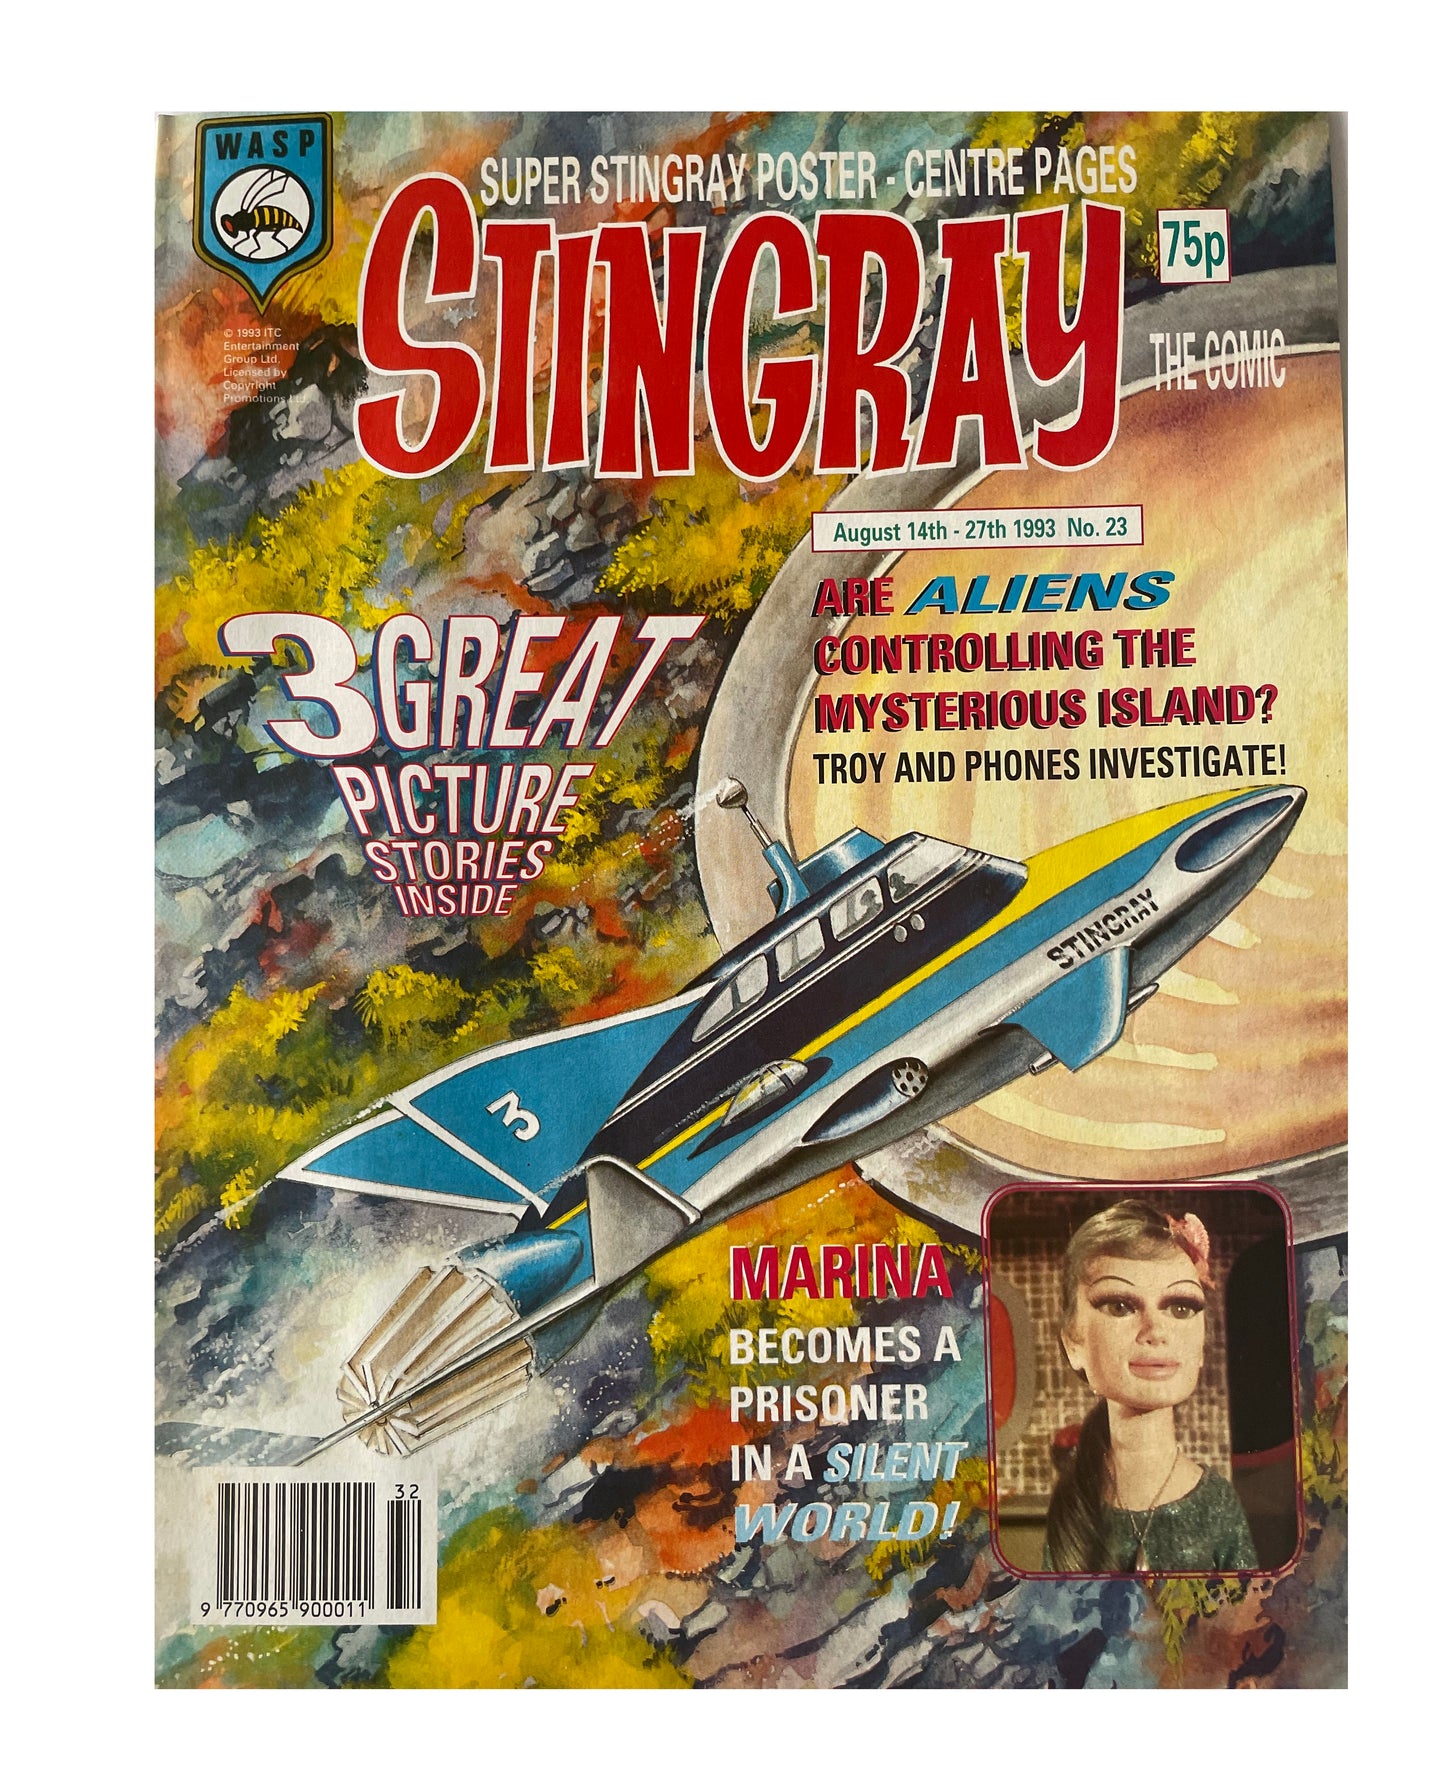 Vintage 1993 Gerry Andersons Stand By For Action... Stingray The Comic Issue No. 23 - August 14th to August 27th - Shop Stock Room Find